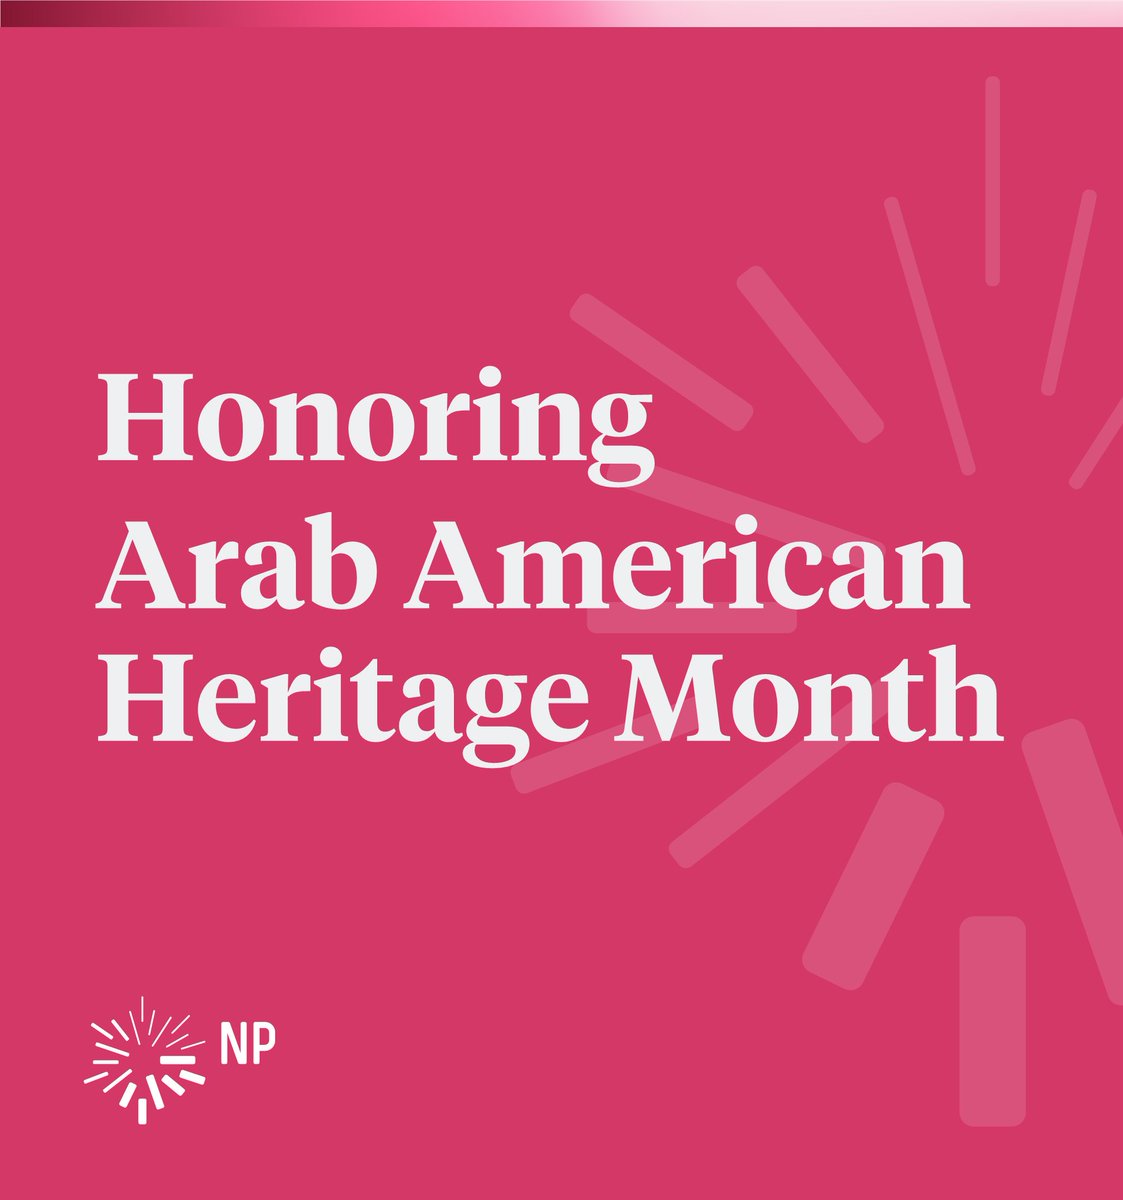 We're proud to recognize National Arab American Heritage Month, a time to celebrate the rich culture, history, and contributions of Arab Americans.